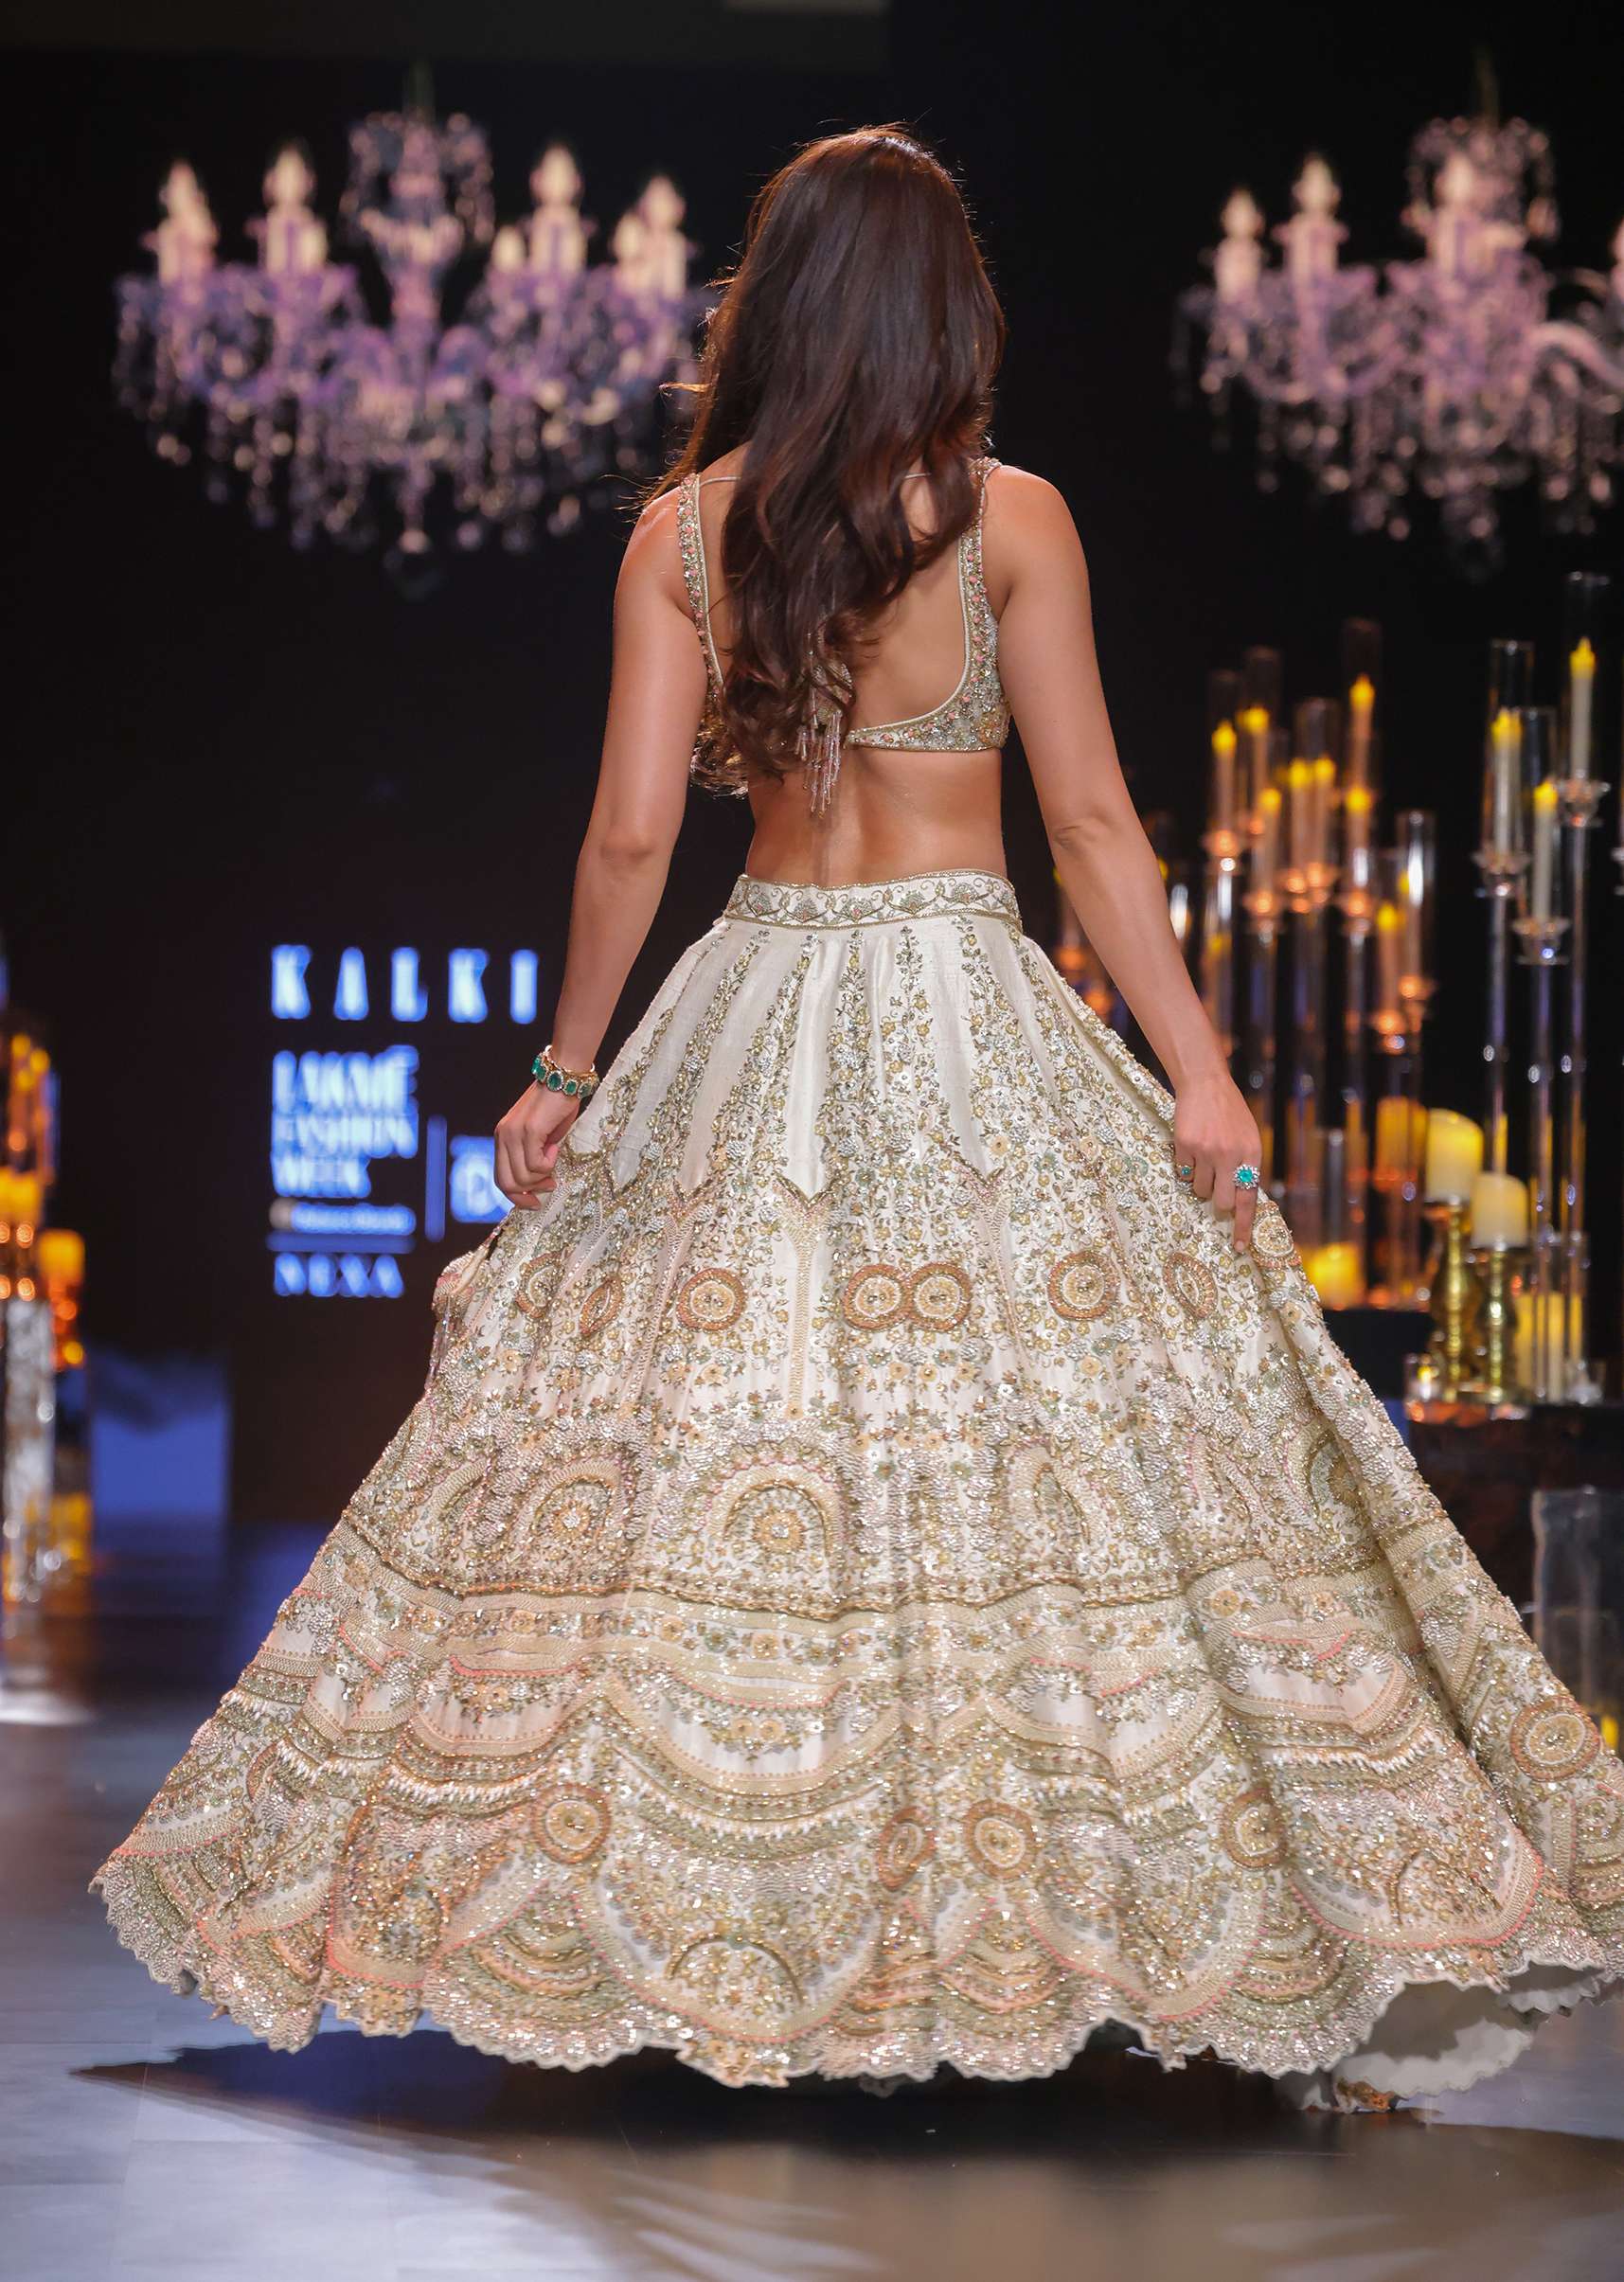 Disha Patani In Peach Lehenga Set with Pearl Butti Embroidery And 3D Flowers